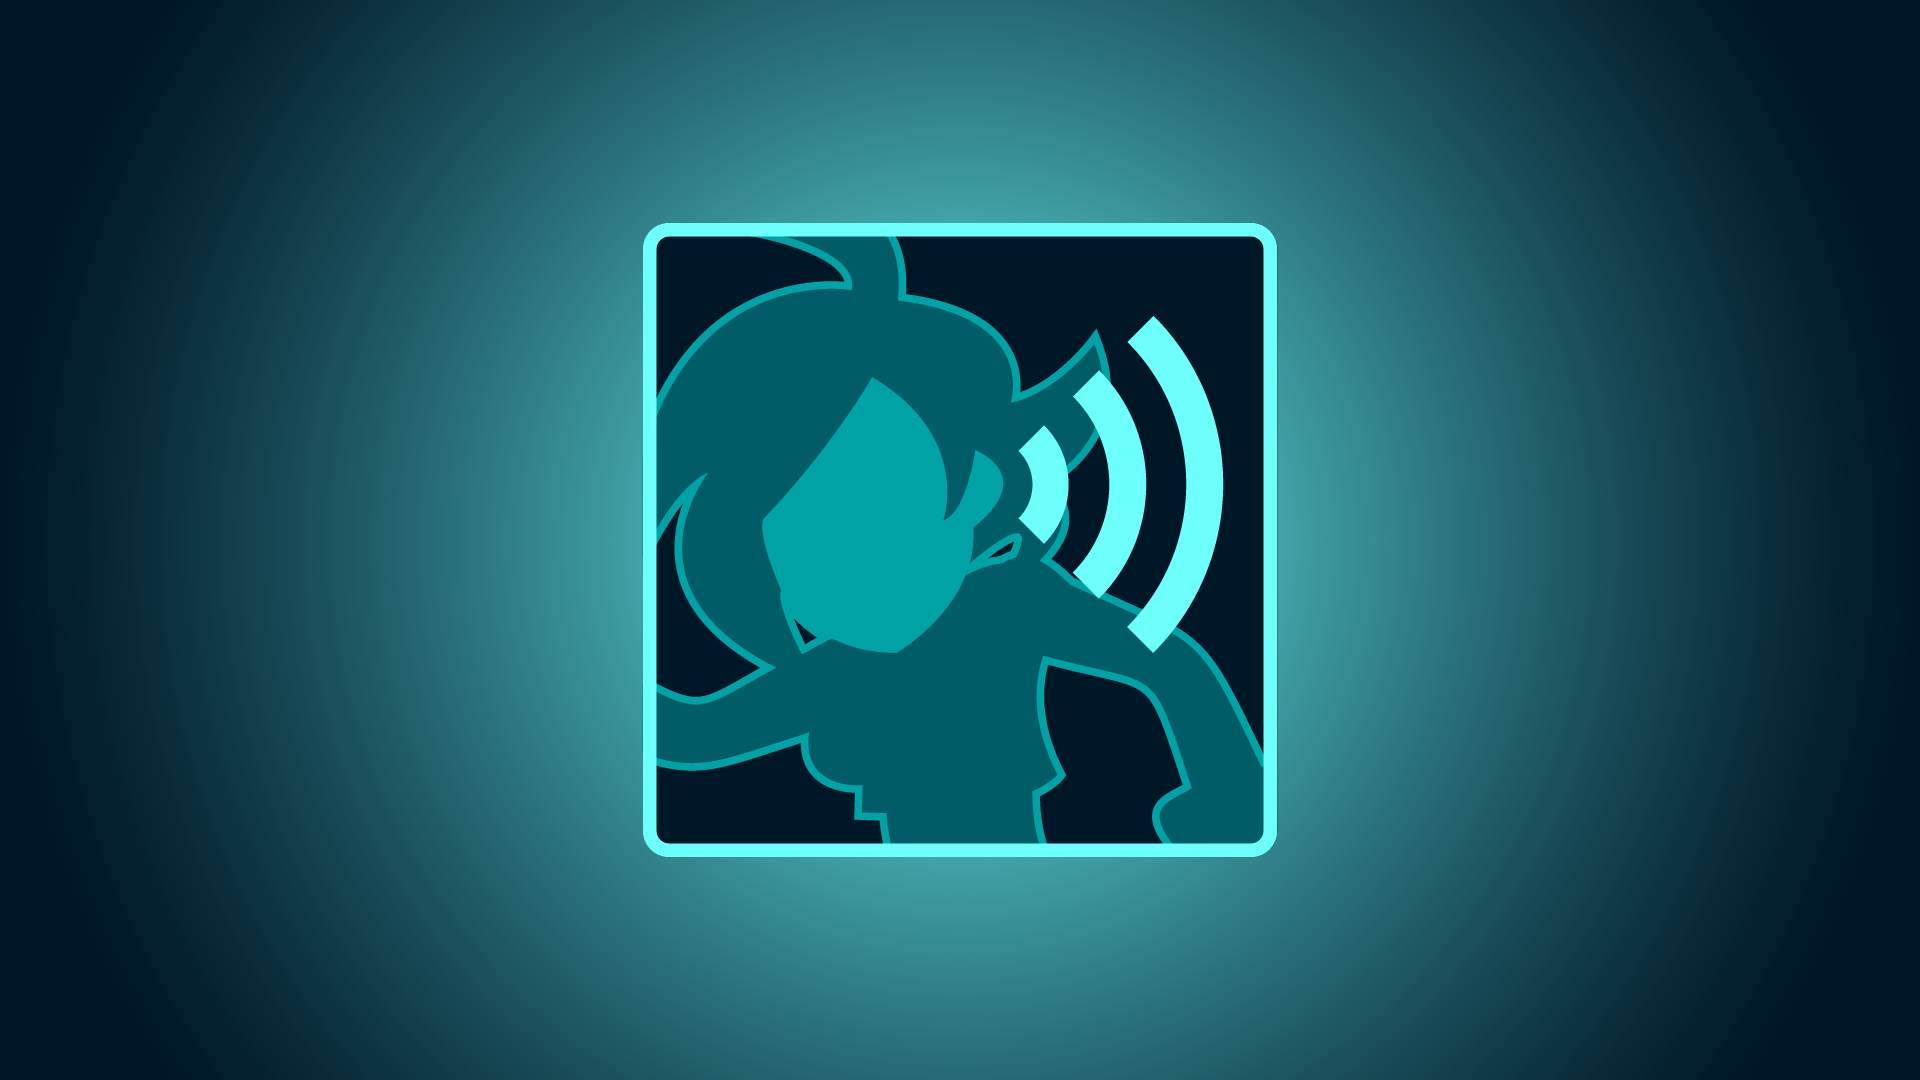 Icon for Gossip